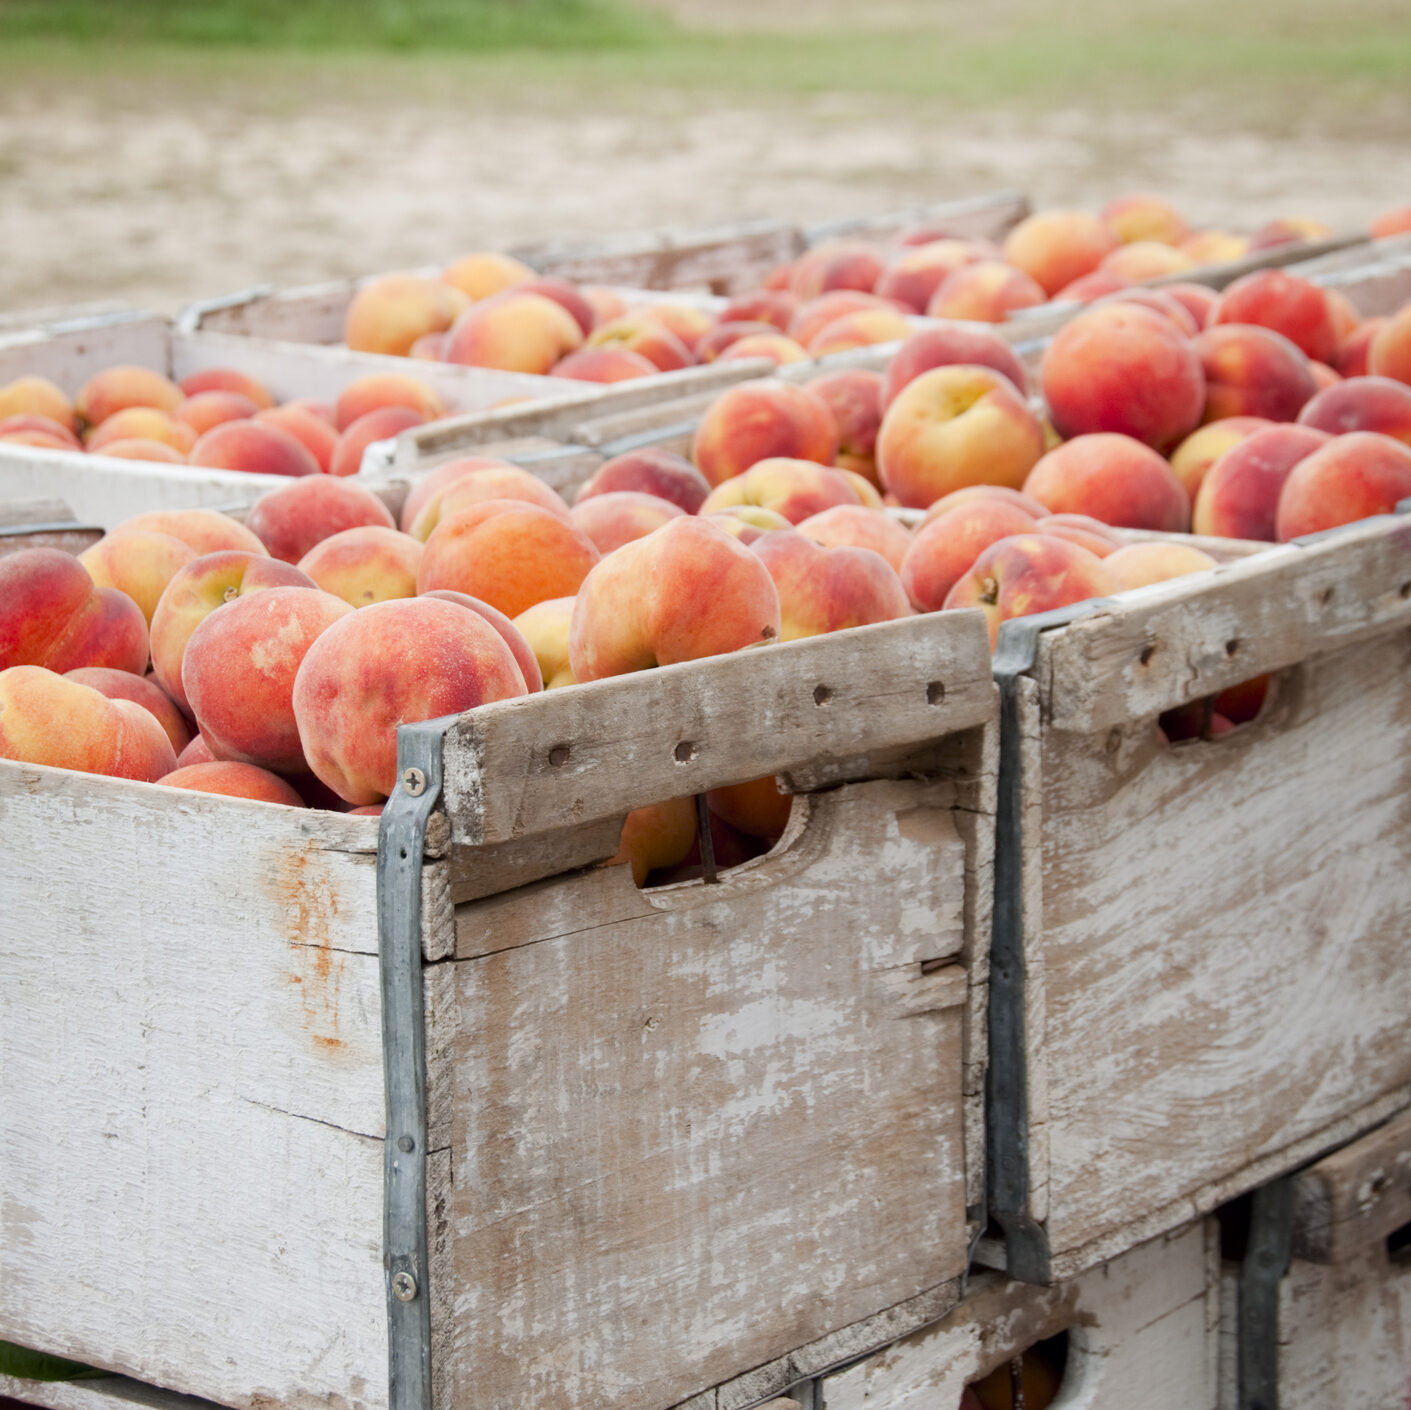 Crates of picked peaches.